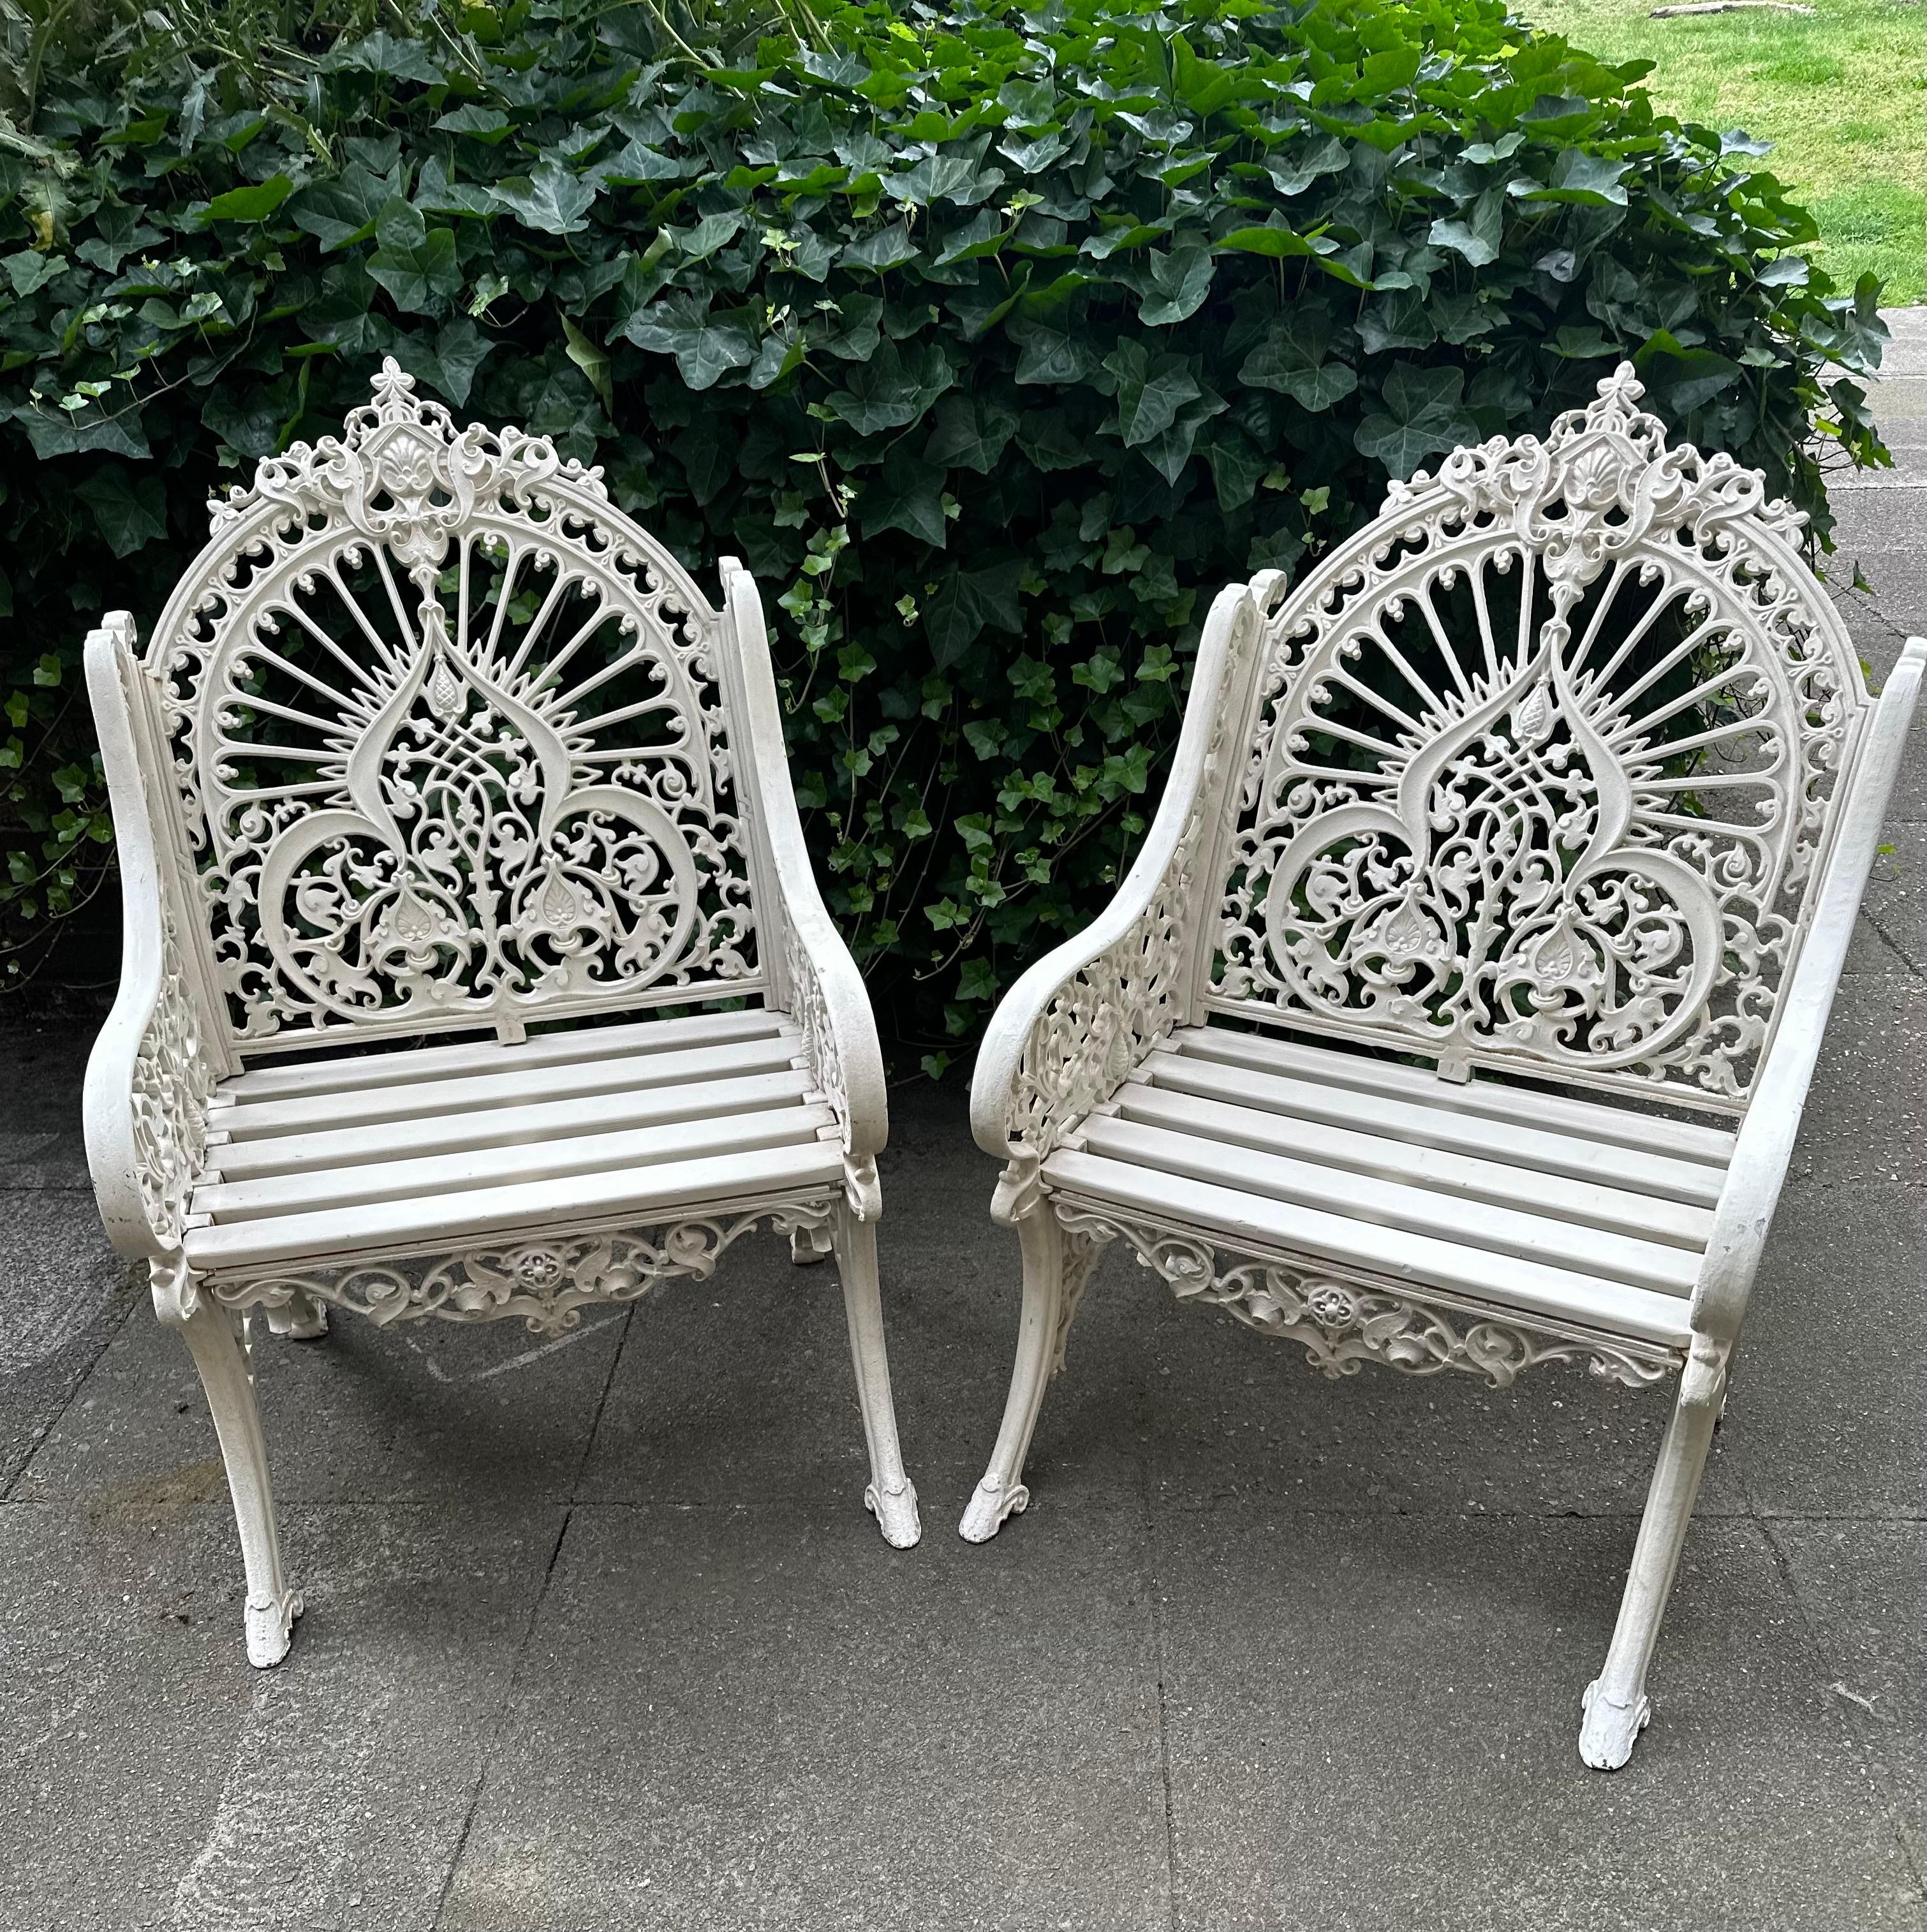 Wonderful and rare pair of original Coalbrookdale chairs made from cast iron with wooden slatted seats and painted white. They have a design mark 90928 first registered in 1853 as “peacock”. 
Extremely elegant and decorative with intricate foliage